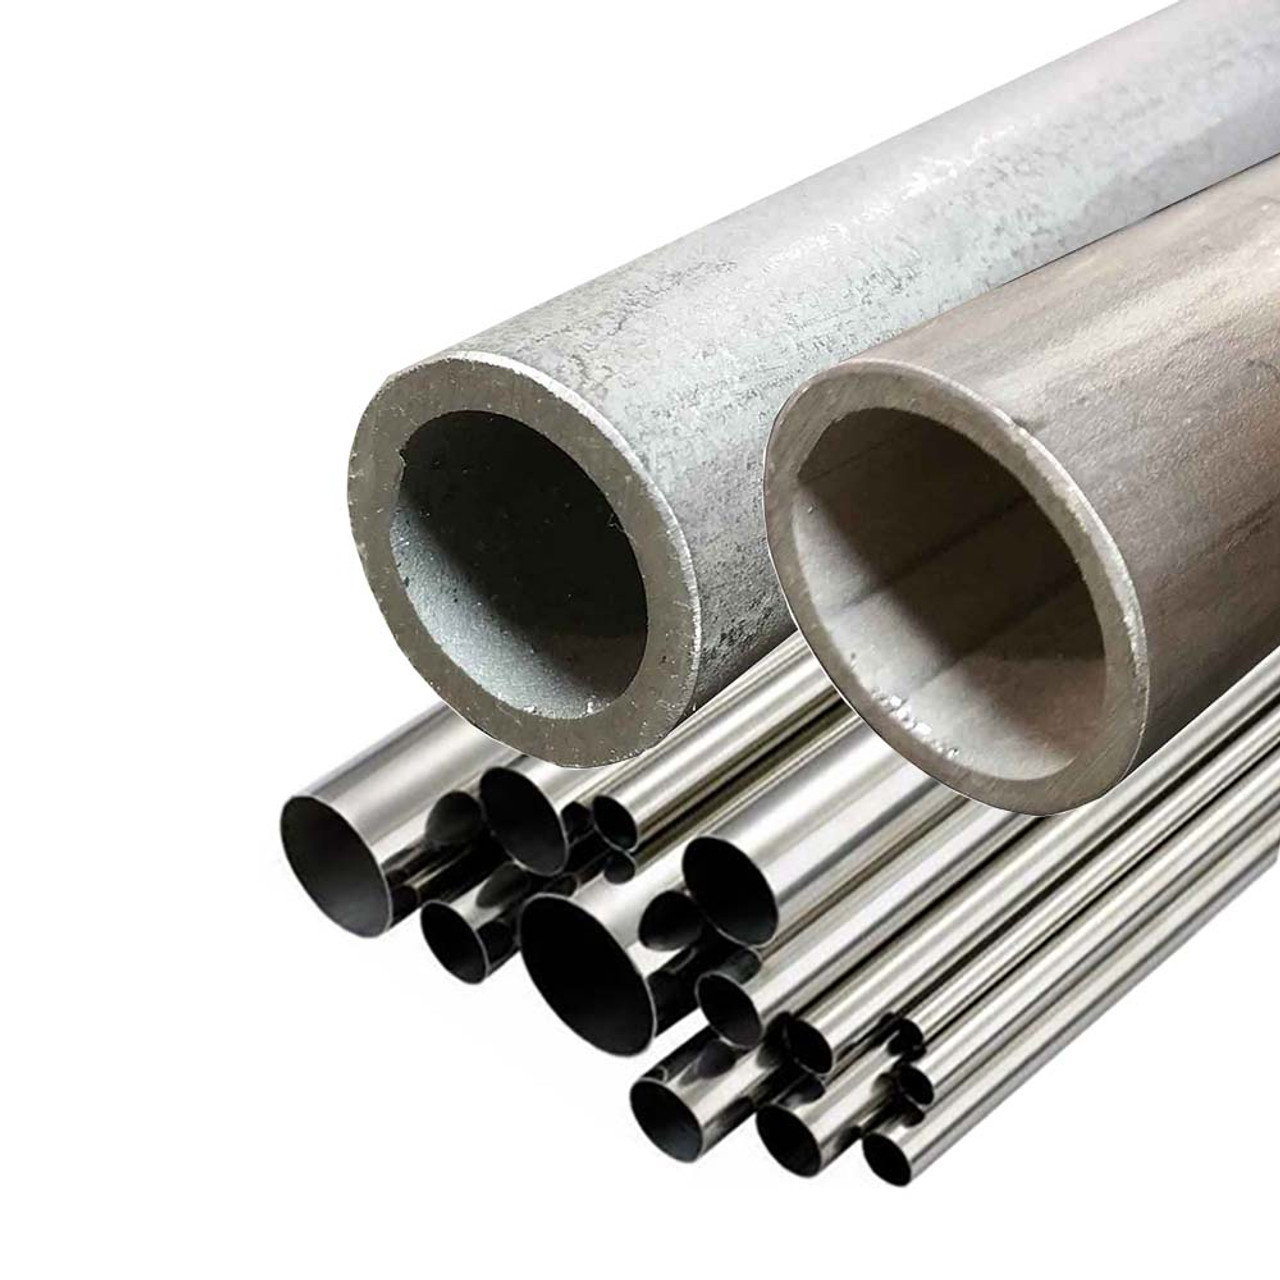 0.500" OD x 0.035" Wall x 60 inches (3 Pack), 304 Stainless Steel Round Tube, Welded